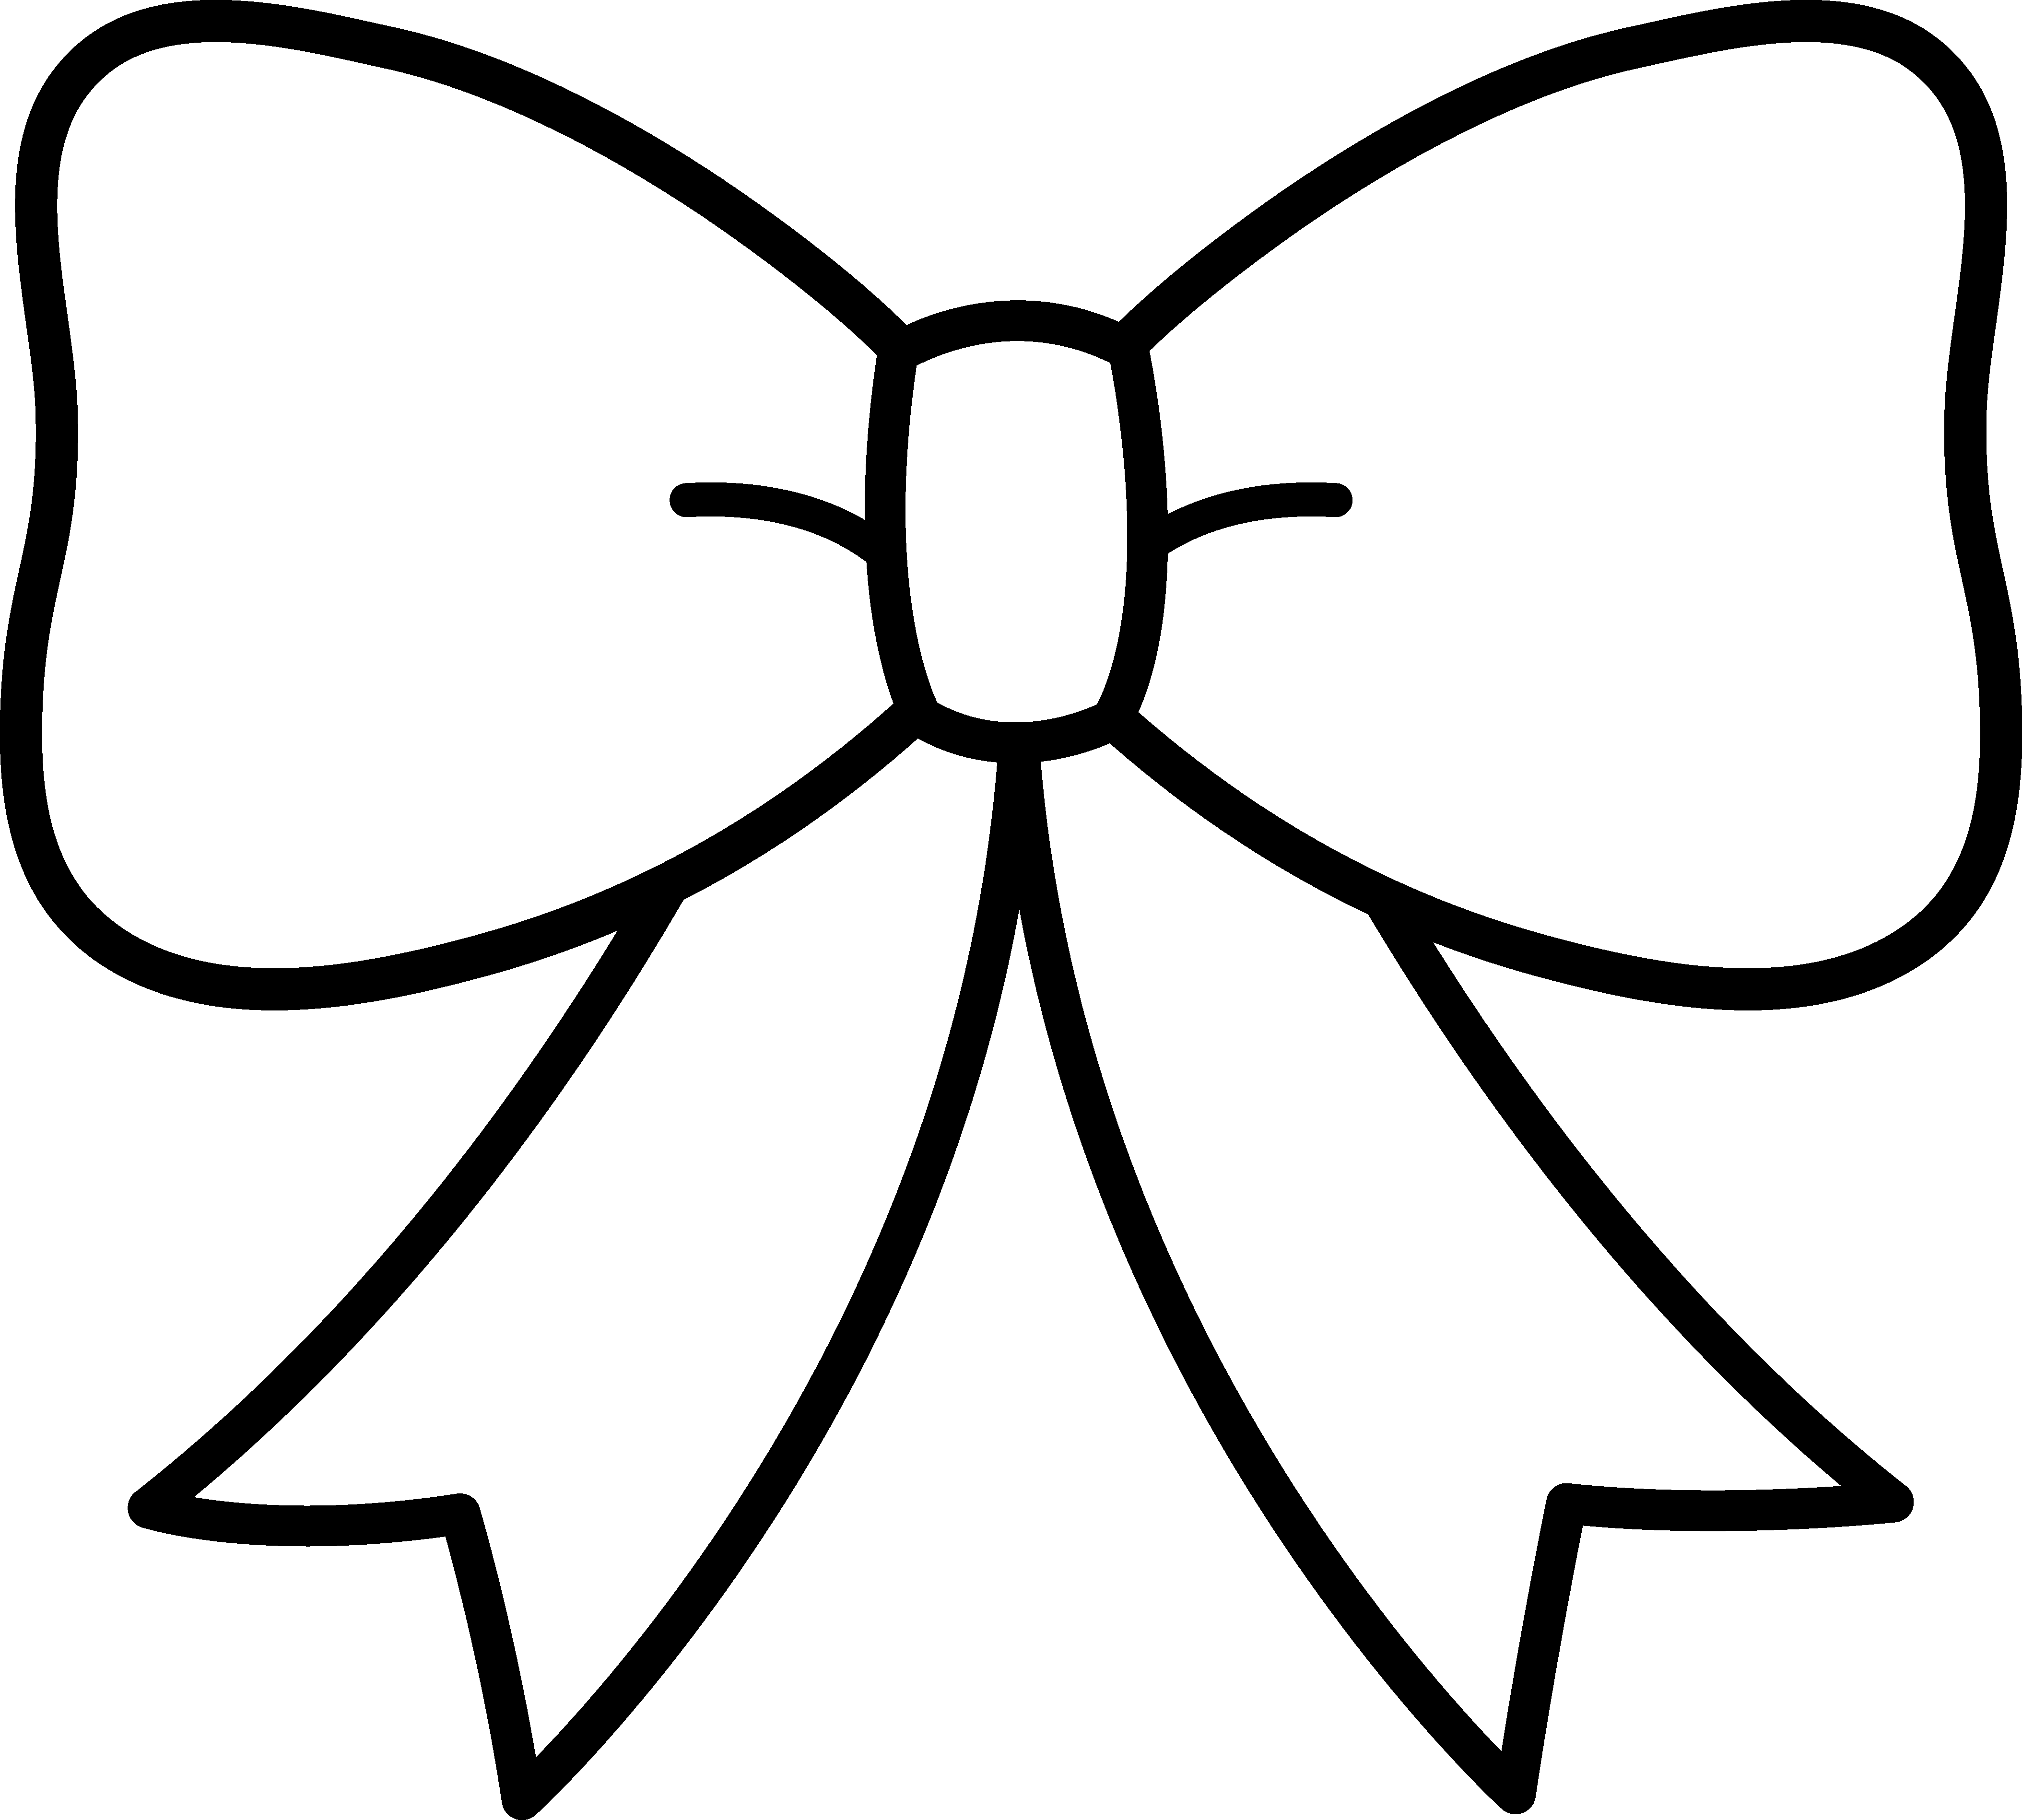 Image of Bows Clipart Bow Image Clip Art